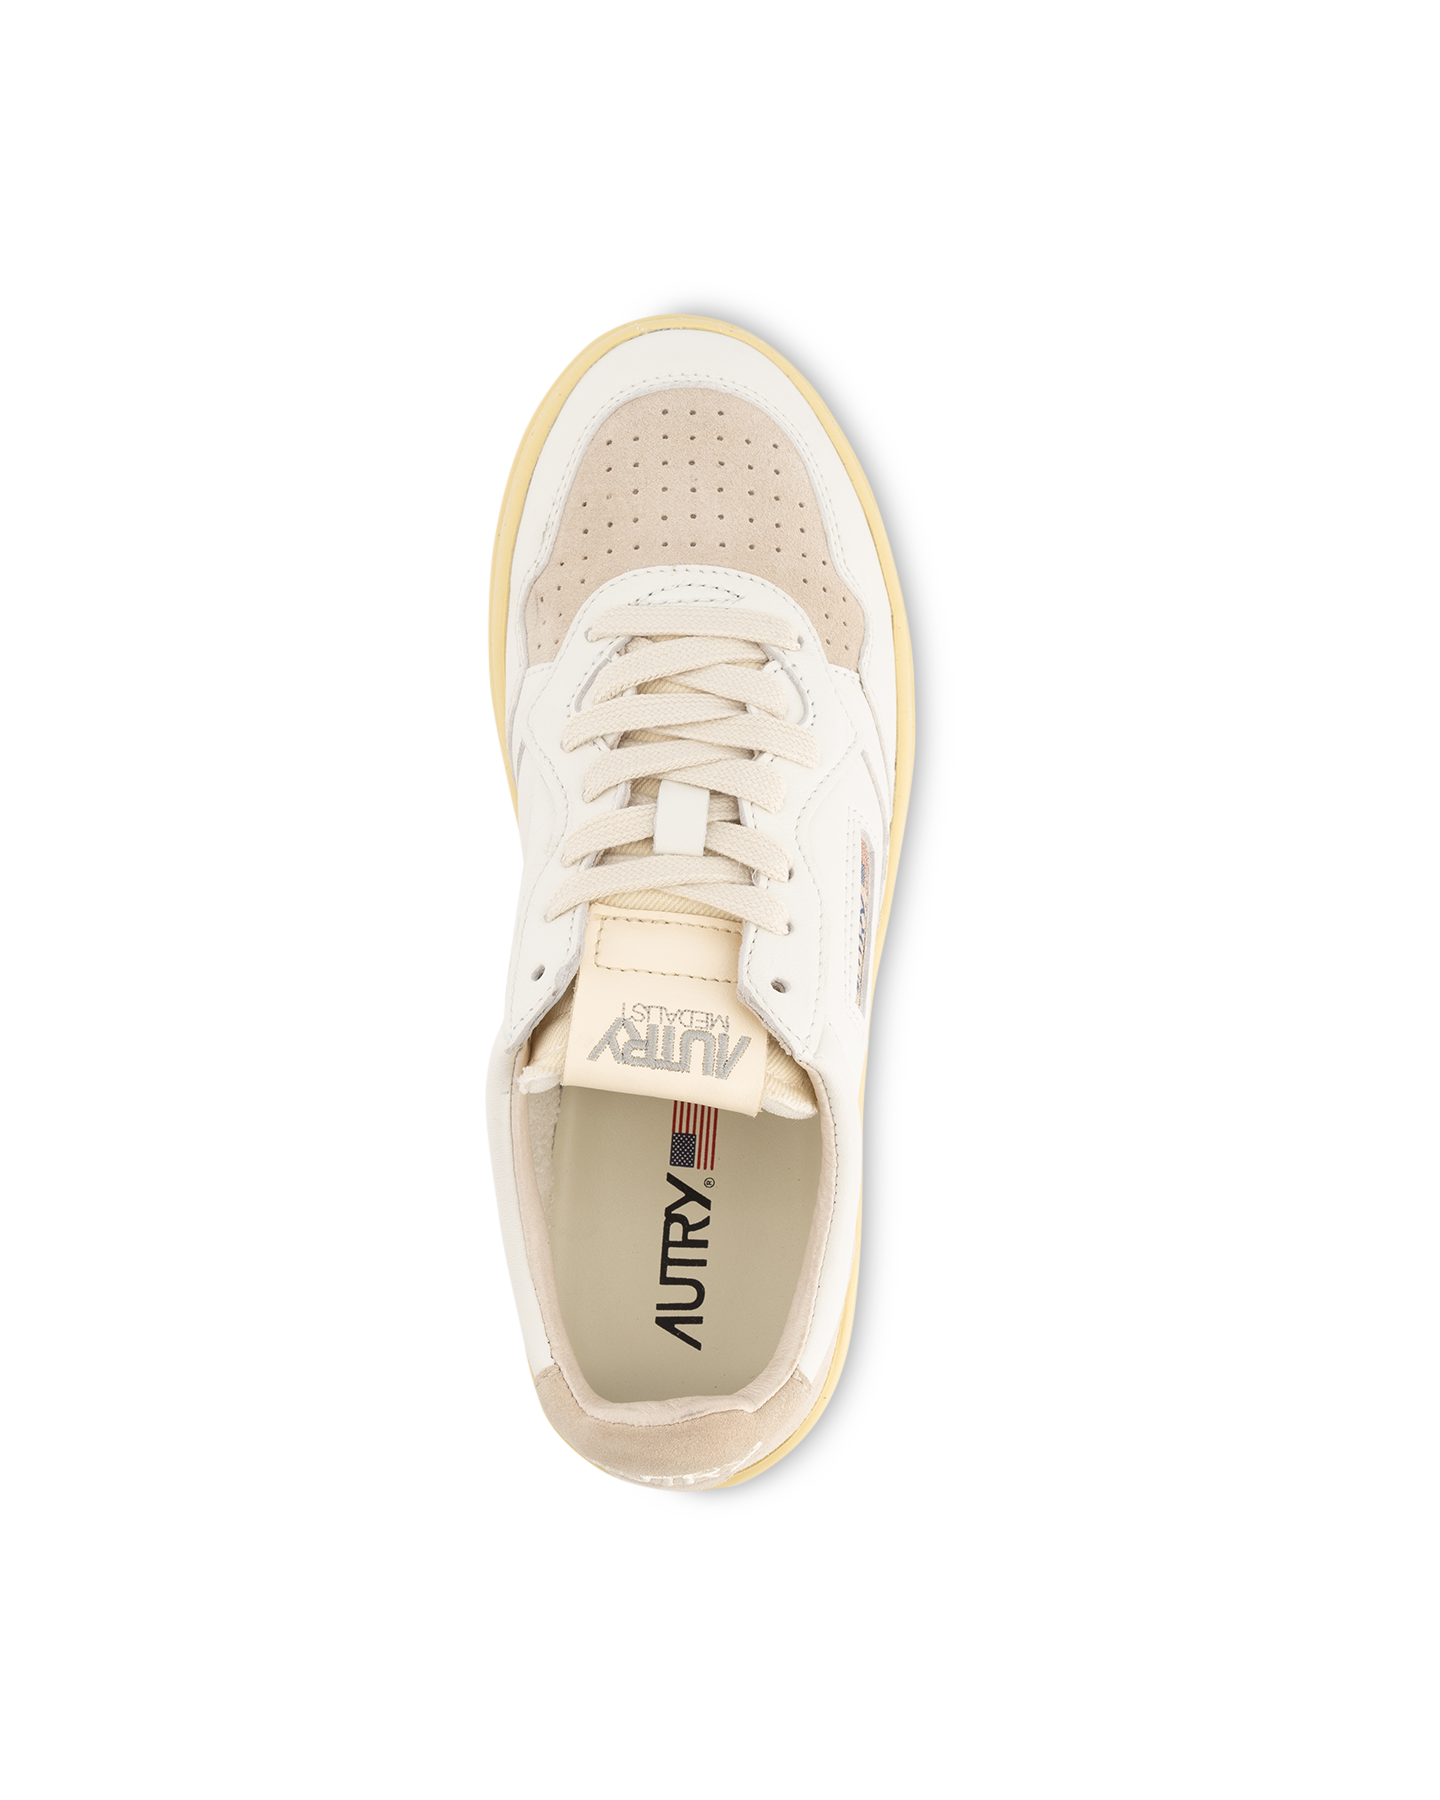 Autry Action Autry 01 Low Wom Suede/Leat Wht/Sand White 5